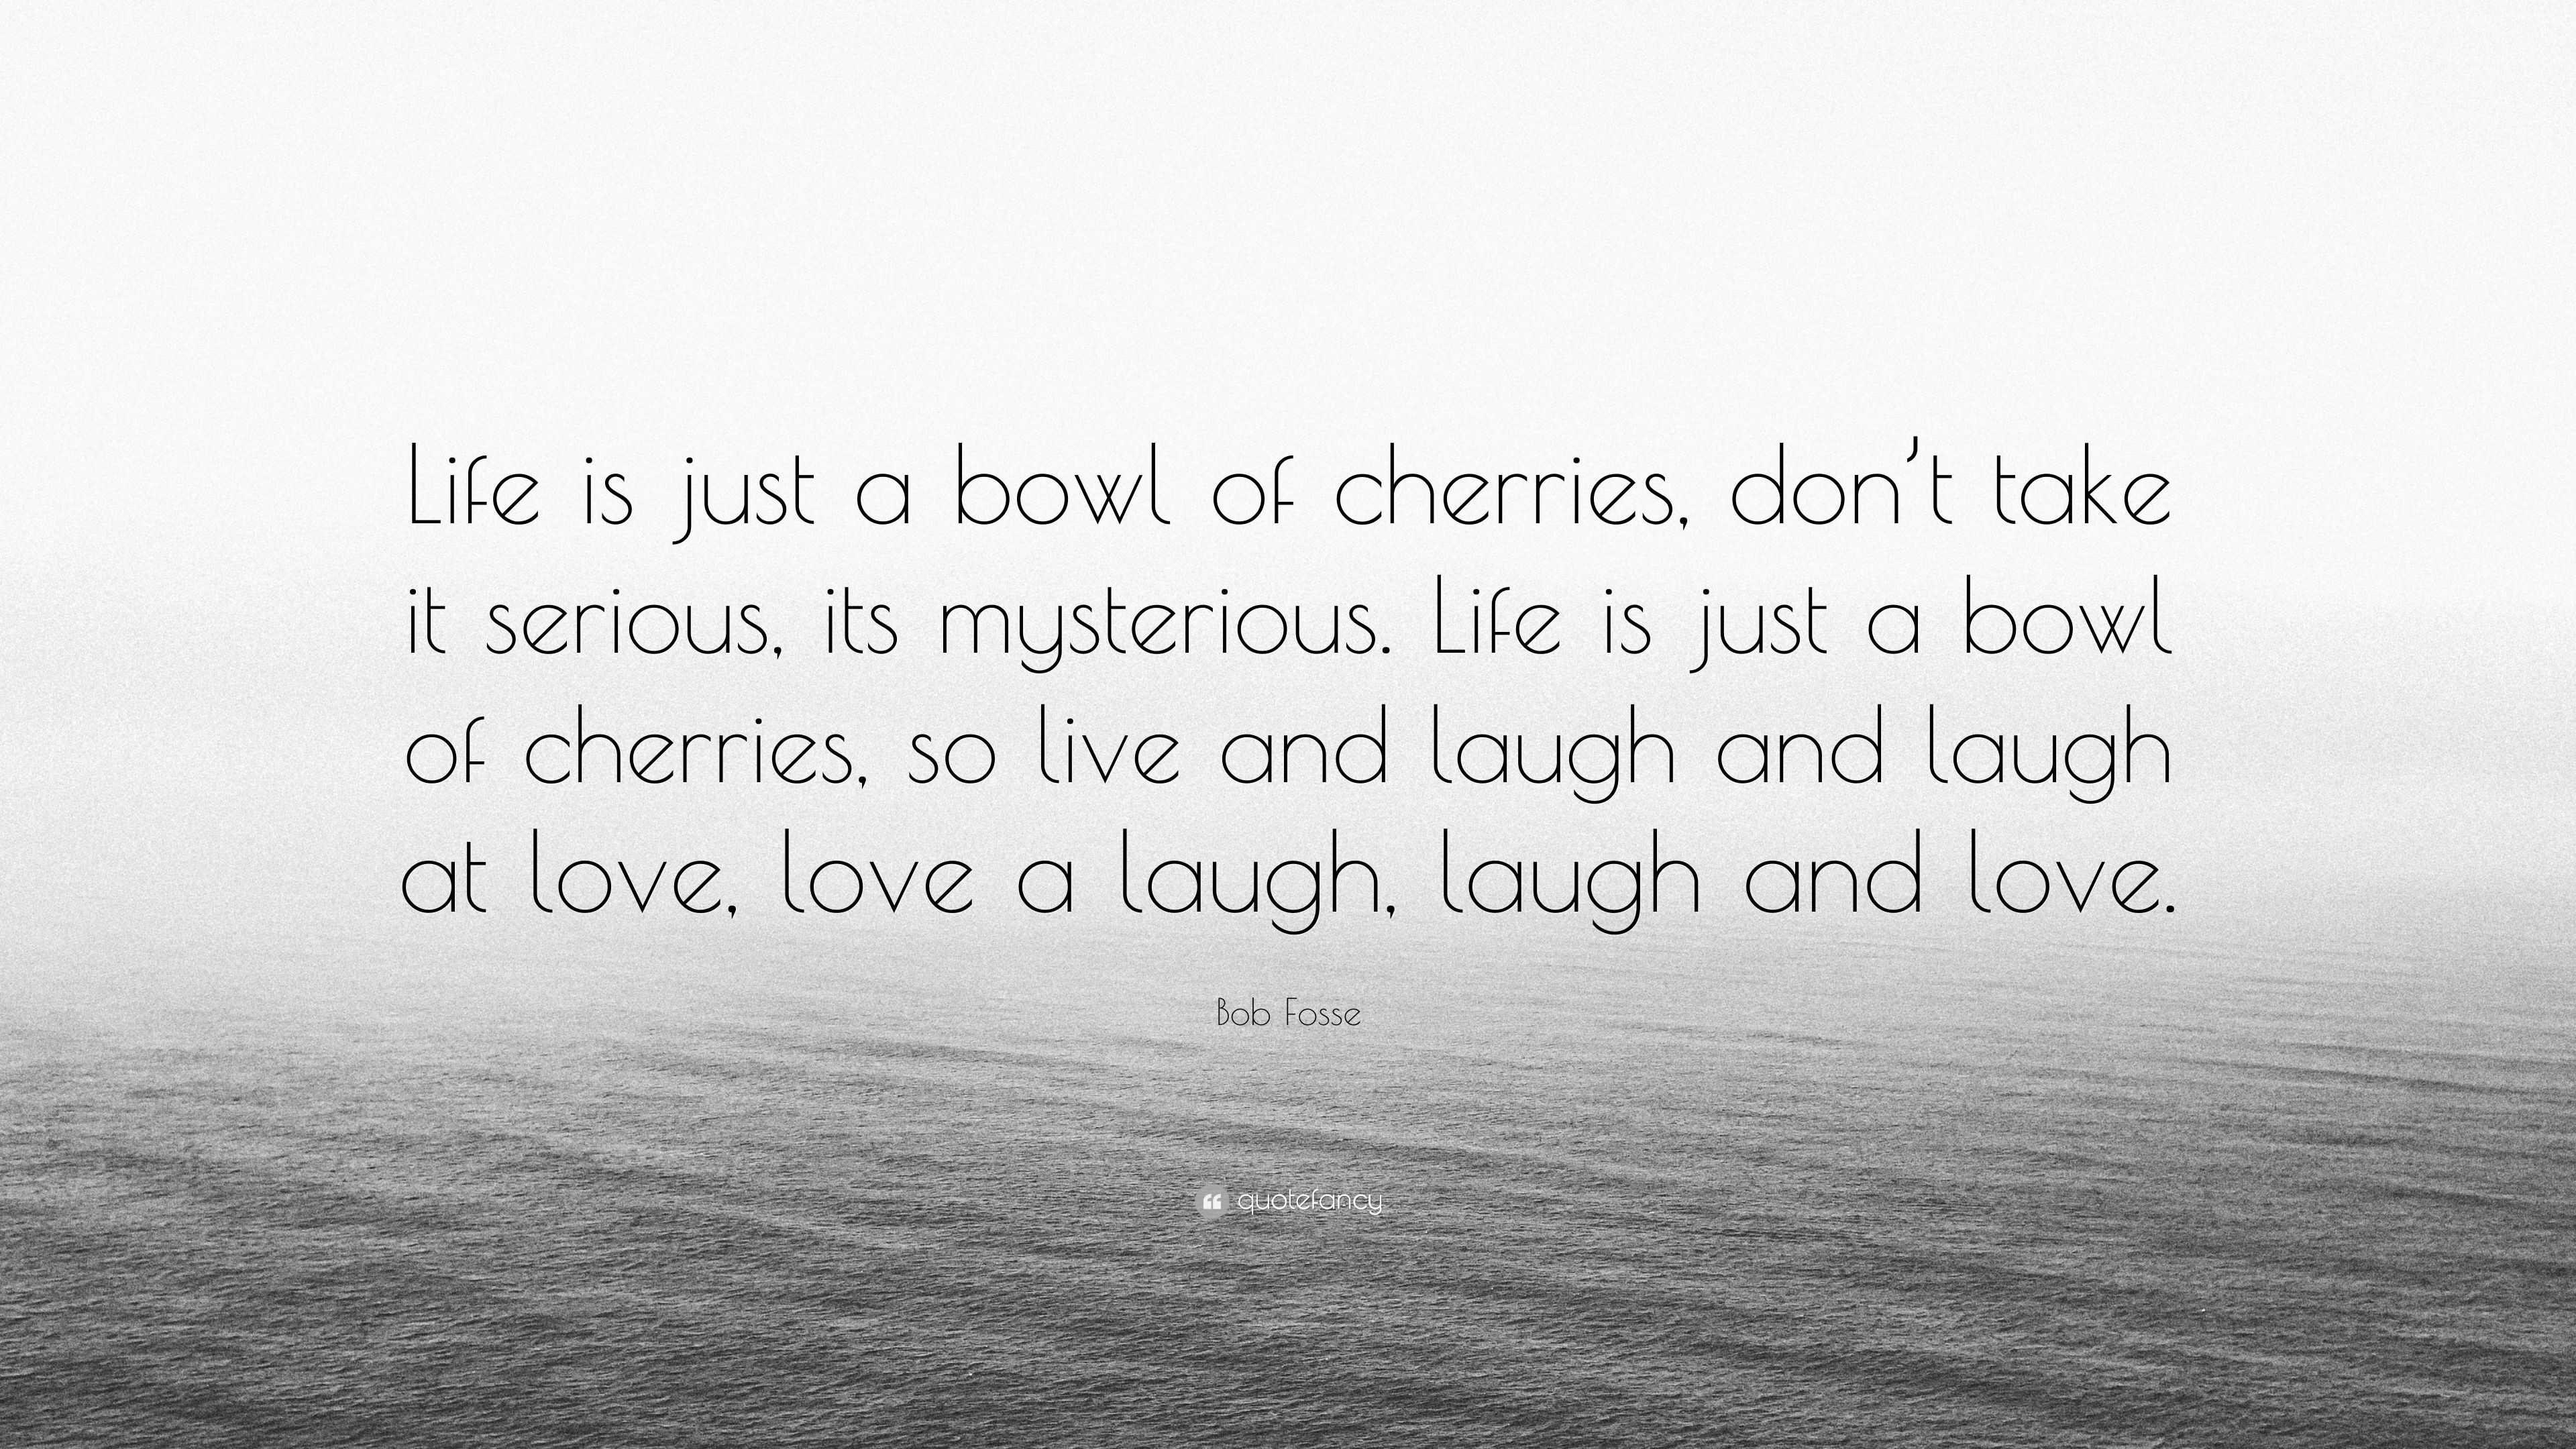 Bob Fosse Quote “Life is just a bowl of cherries don t